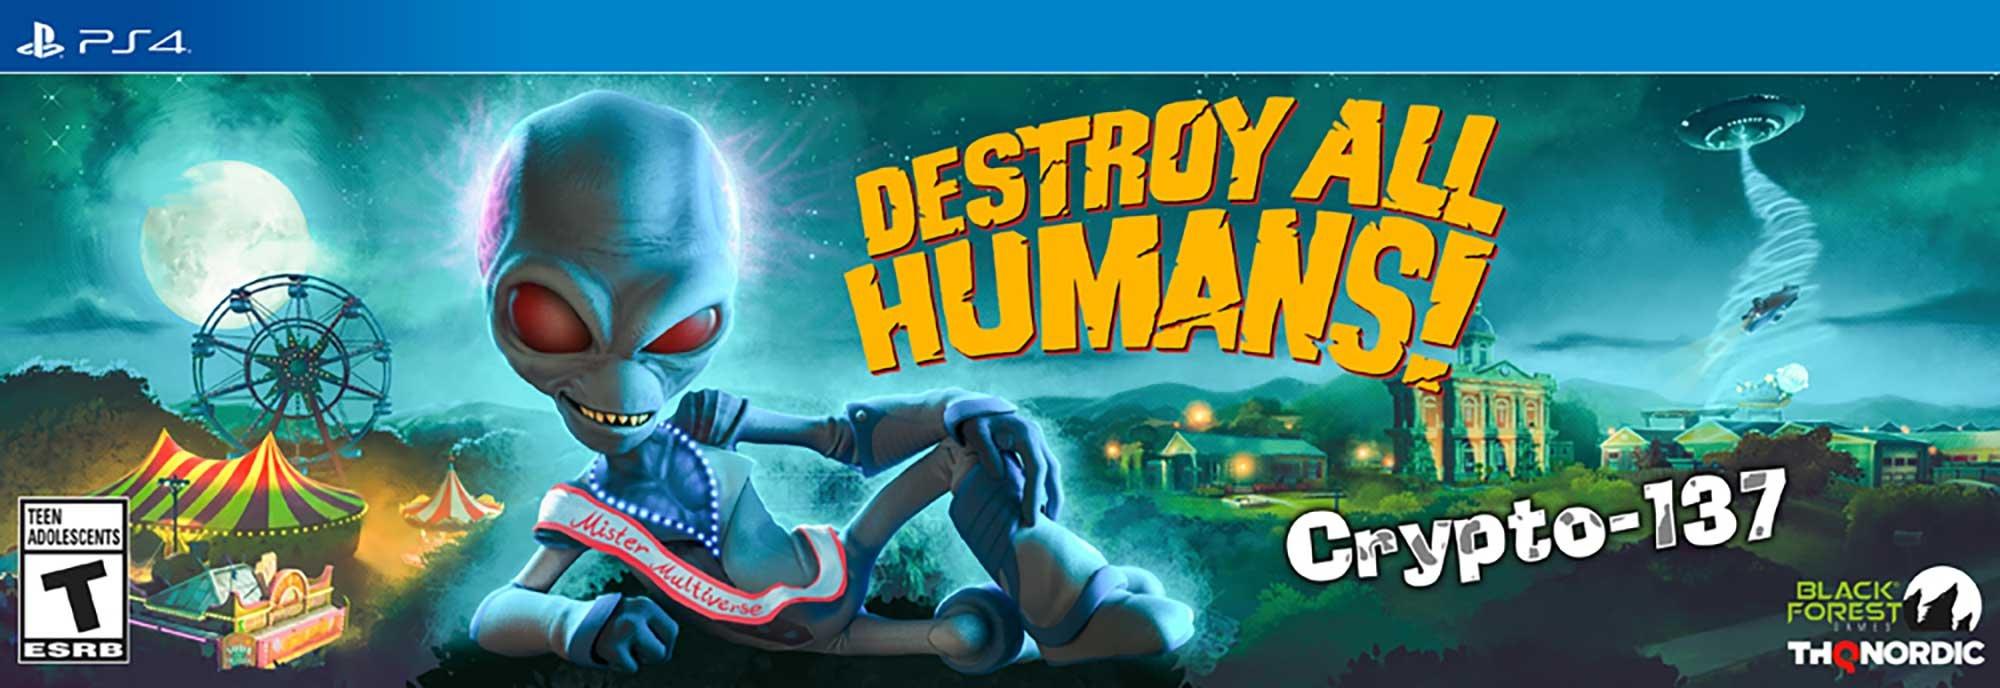 destroy all humans crypto 137 edition pc